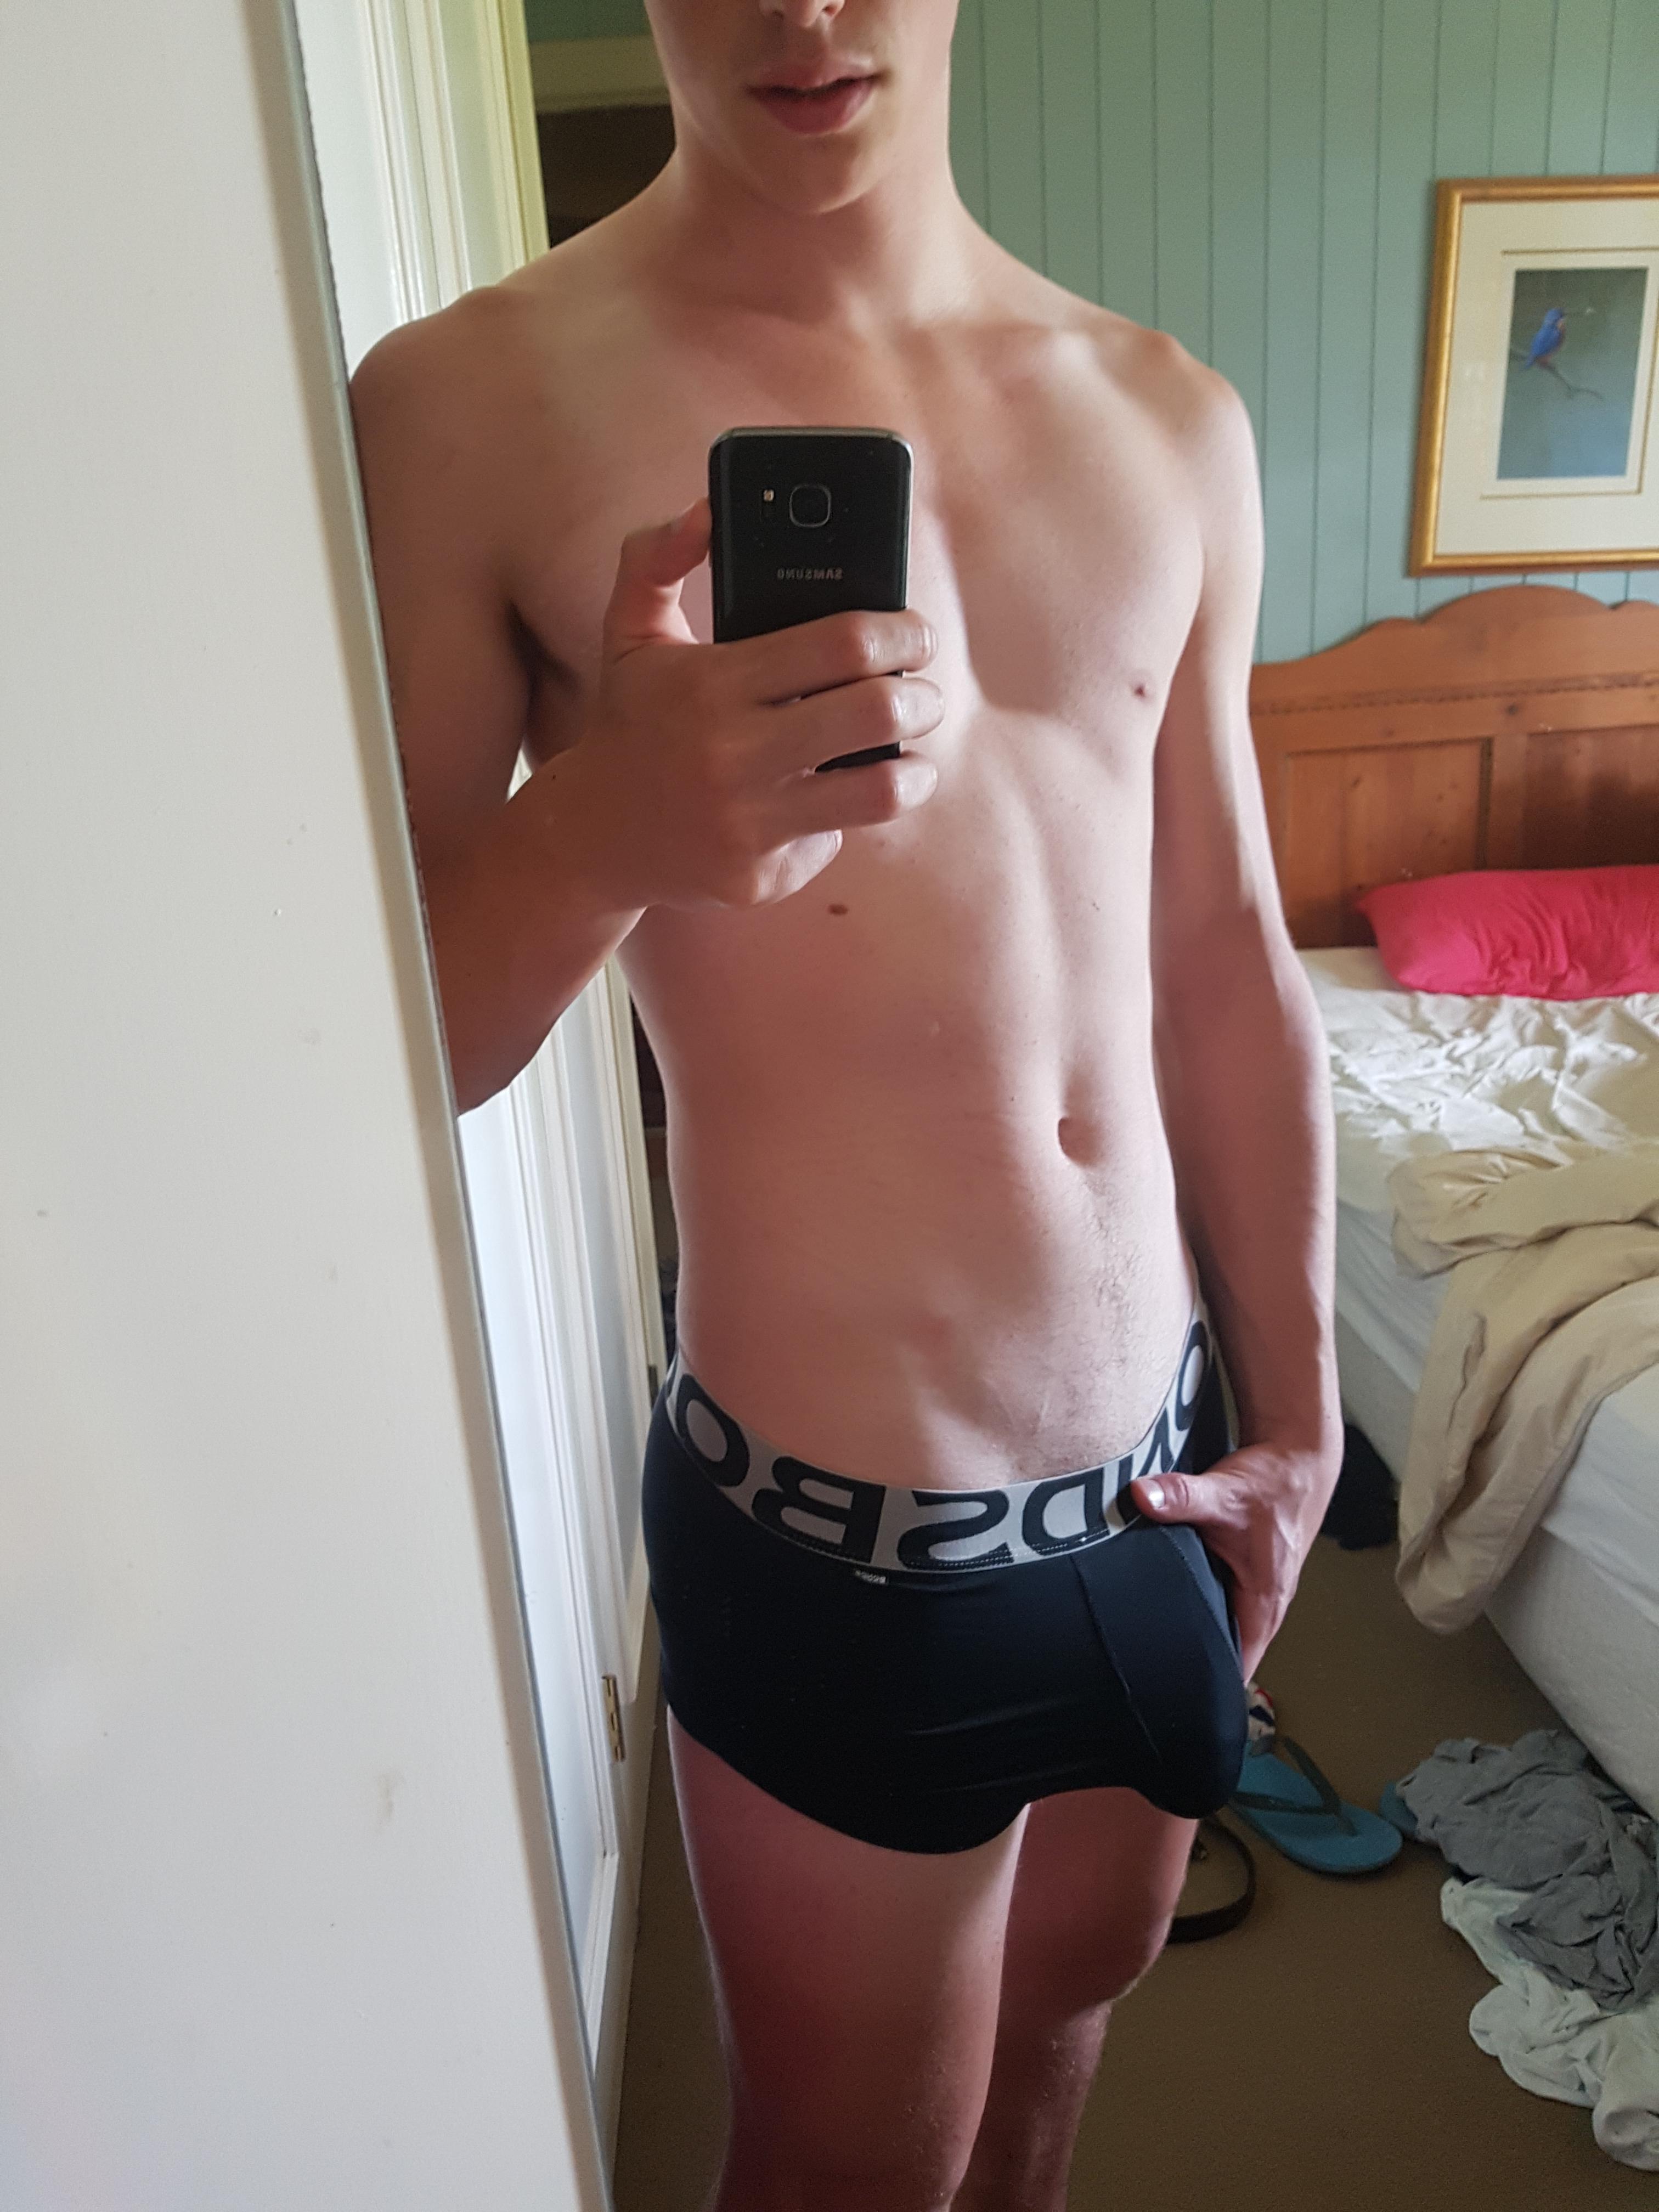 Been trying to work out more. Slightly better body, but same old bulge :)